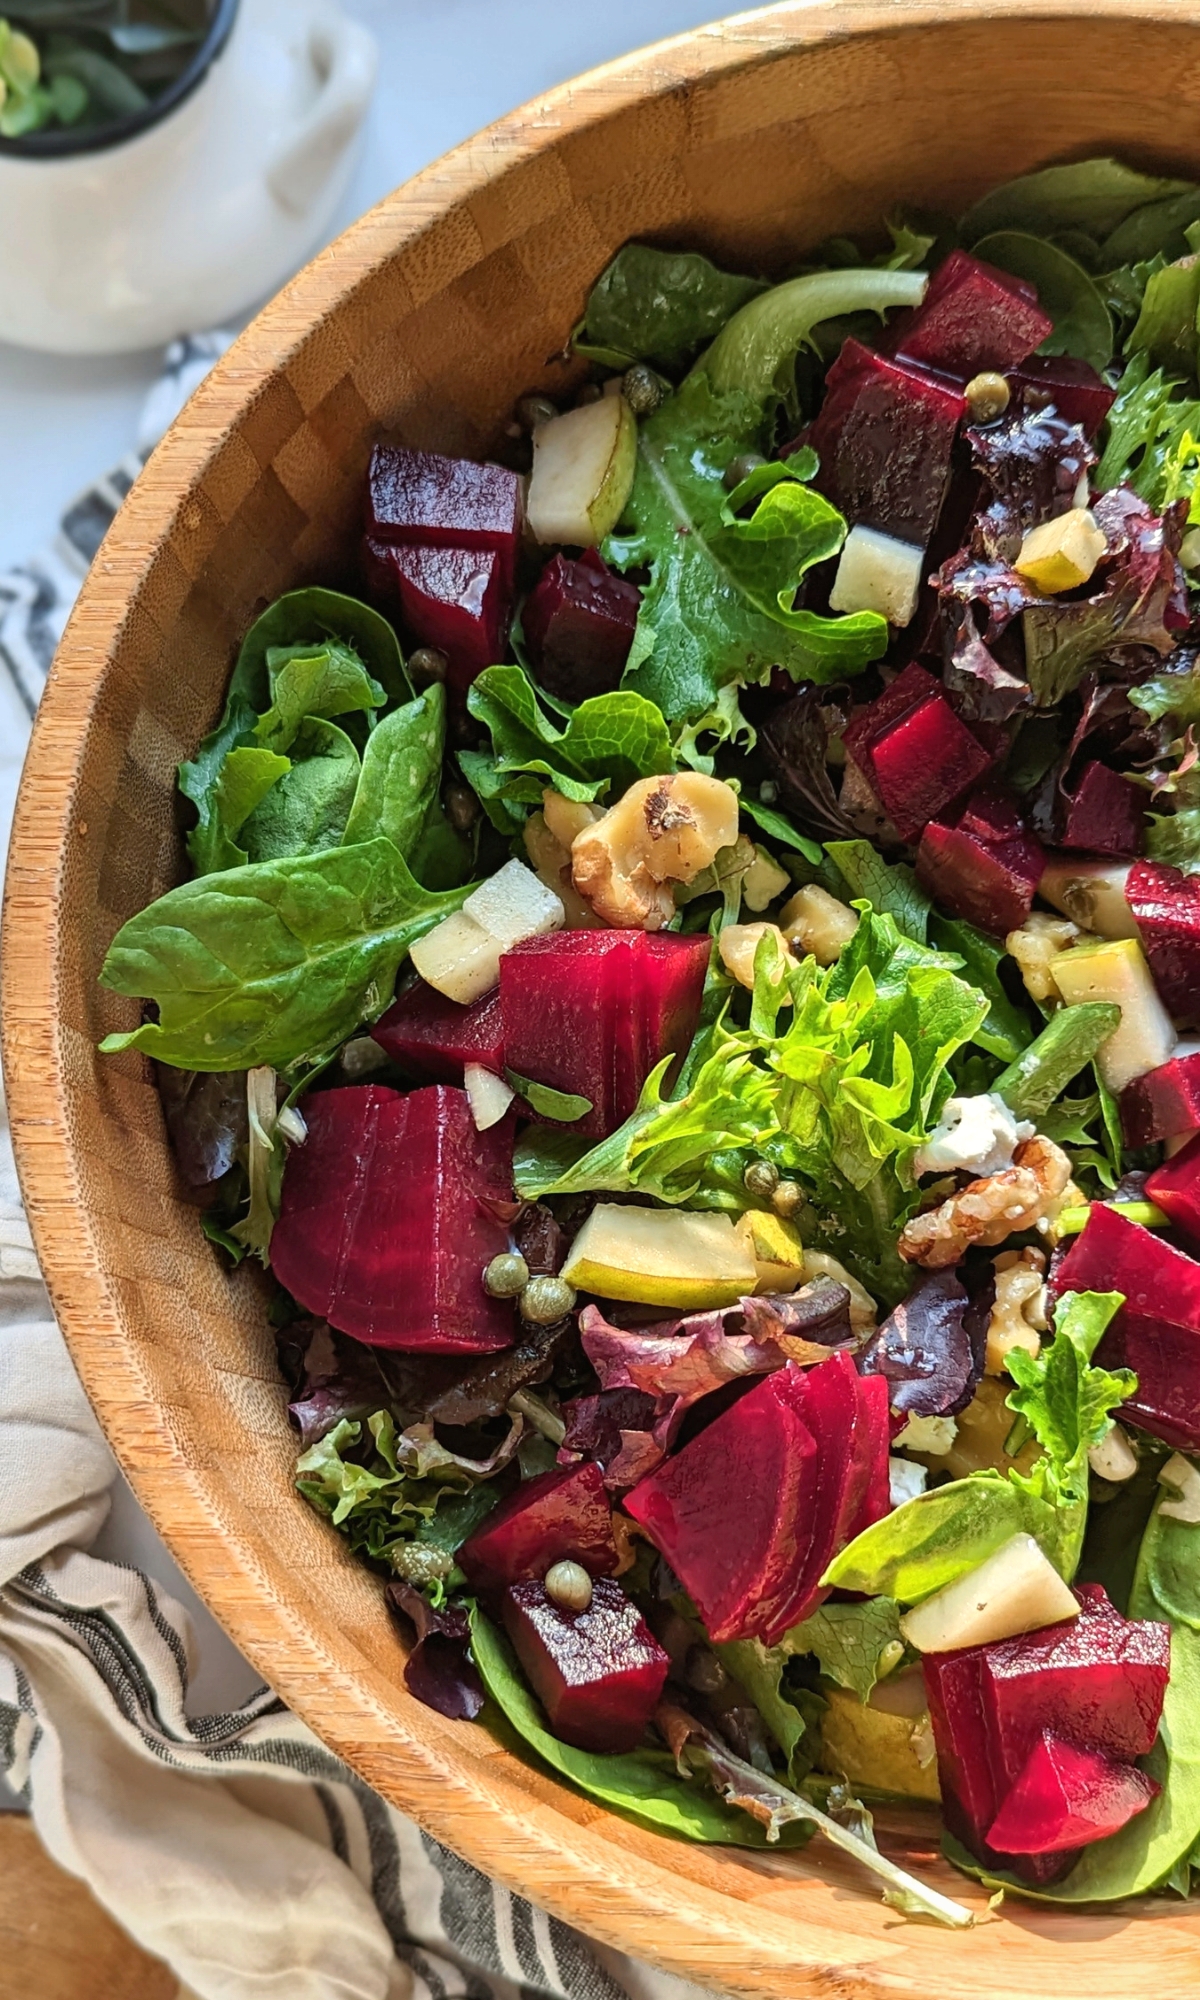 pear and beet salad recipe vegan beets recipes fruit and vegetable salad with mixed greens and walnuts.